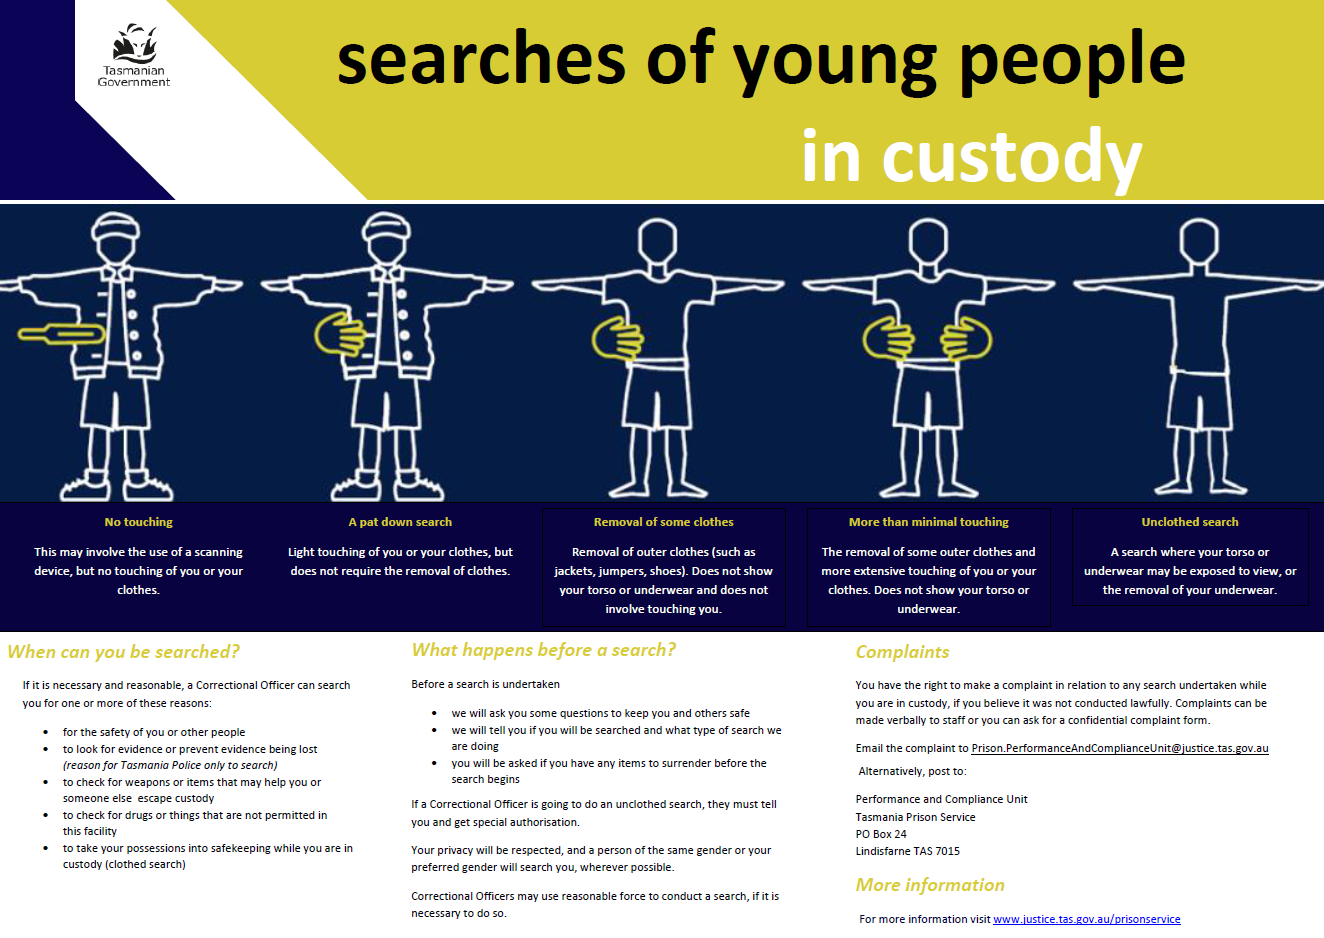 Searches of Young People in Custody poster